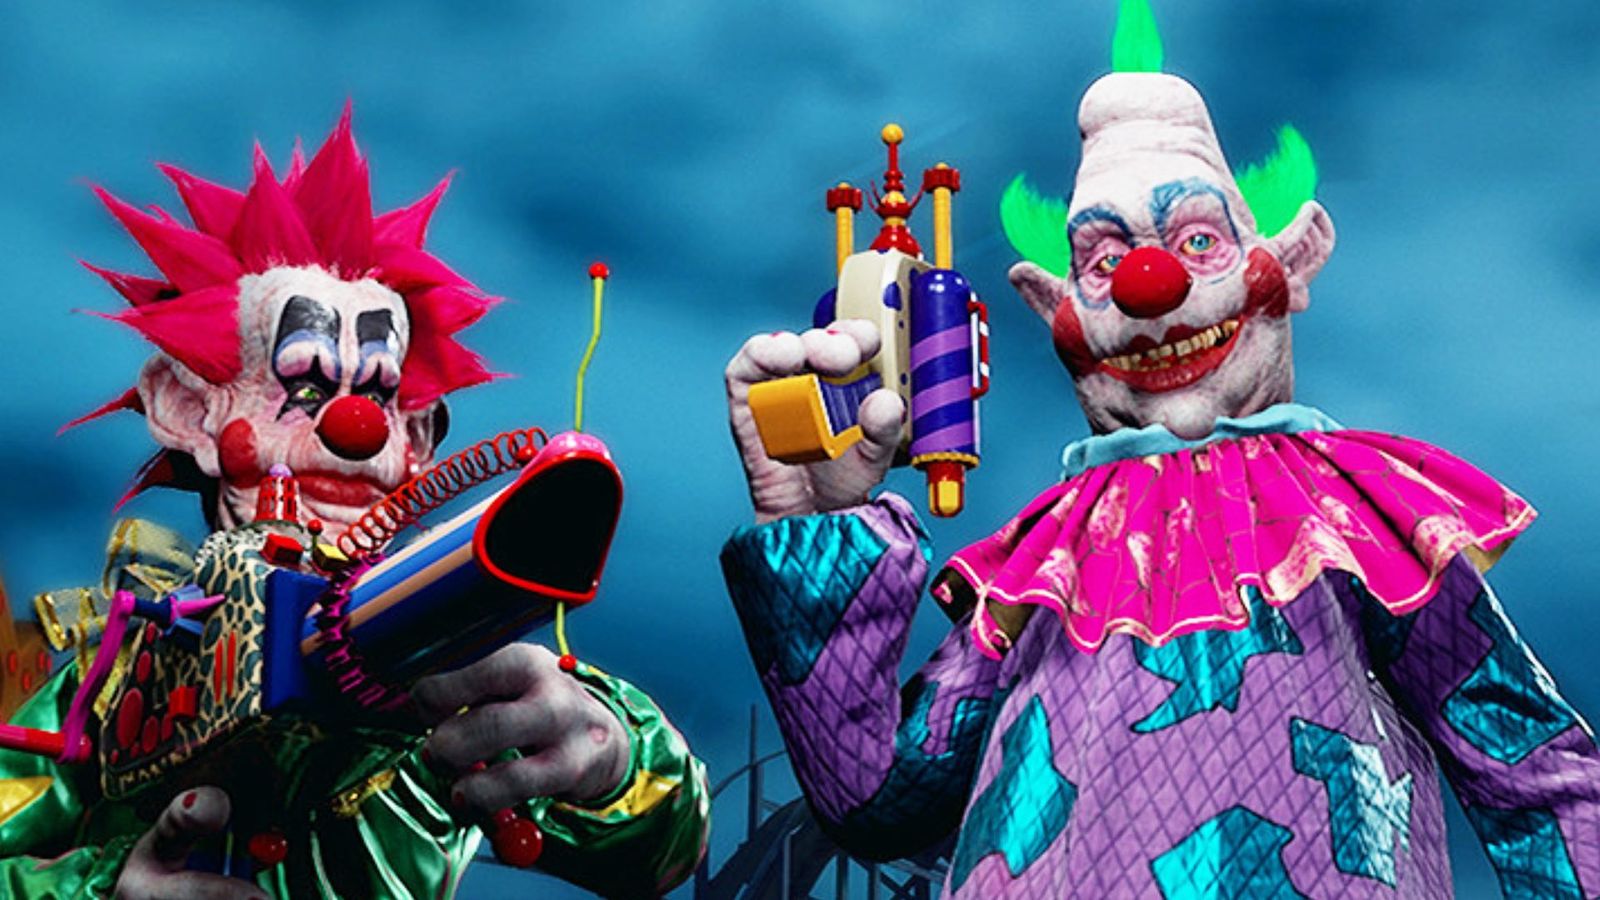 Killer Klowns from Outer Space characters brandishing weapons 